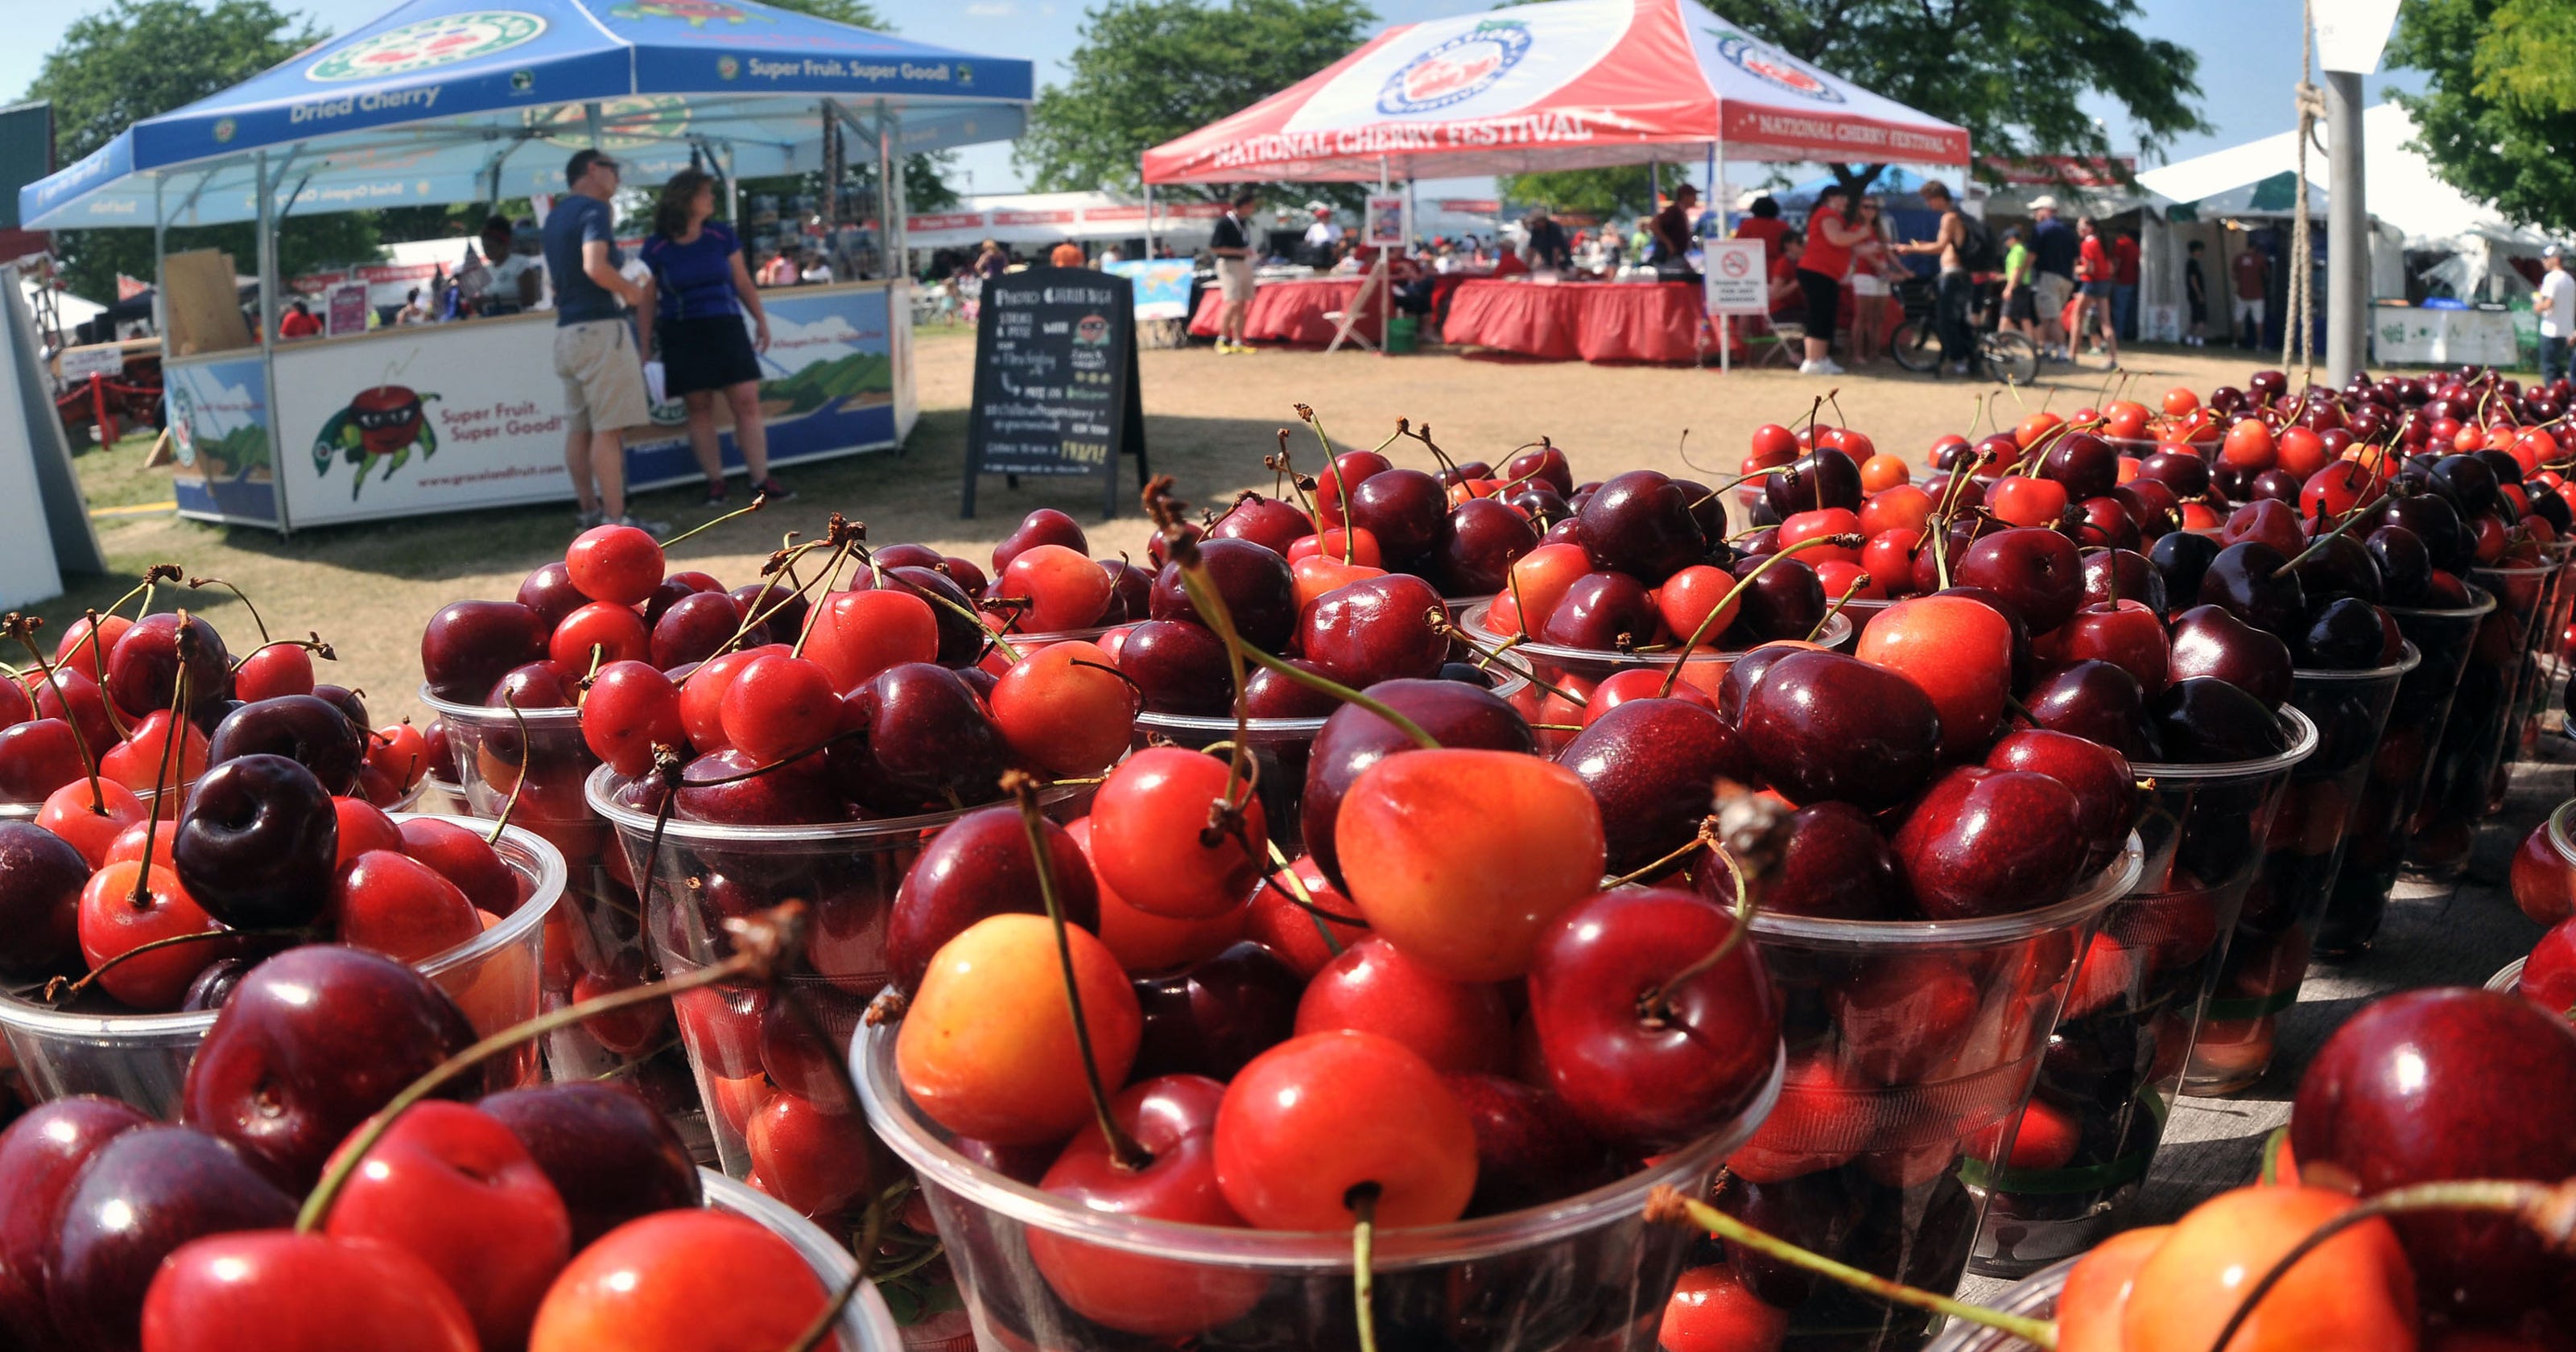 Travel Smart National Cherry Festival in Traverse City is looking sweet